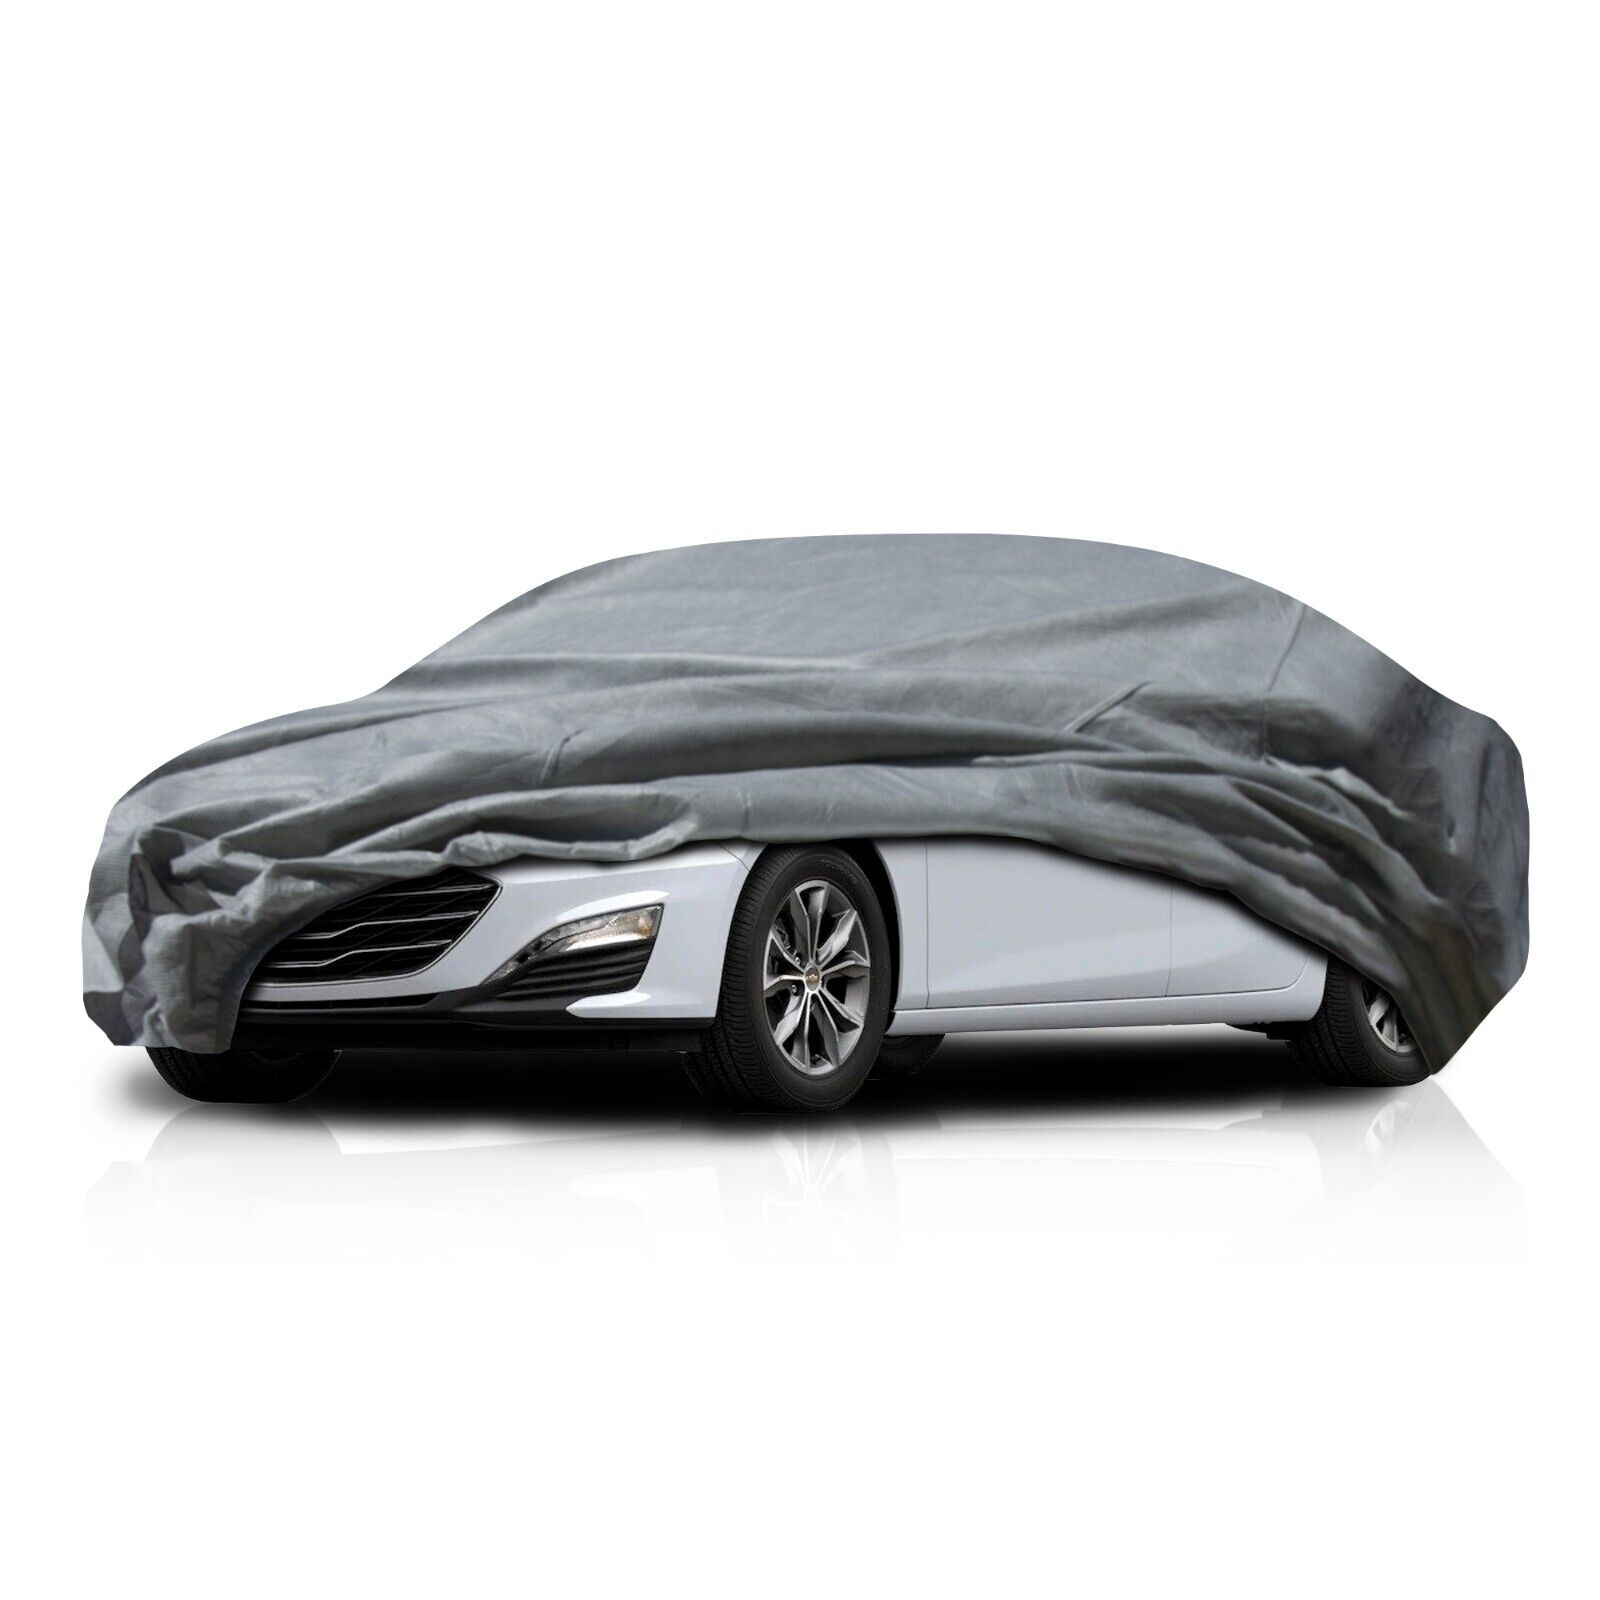 WeatherTec Plus HD Car Cover for Toyota Paseo Cynos 1991-1999